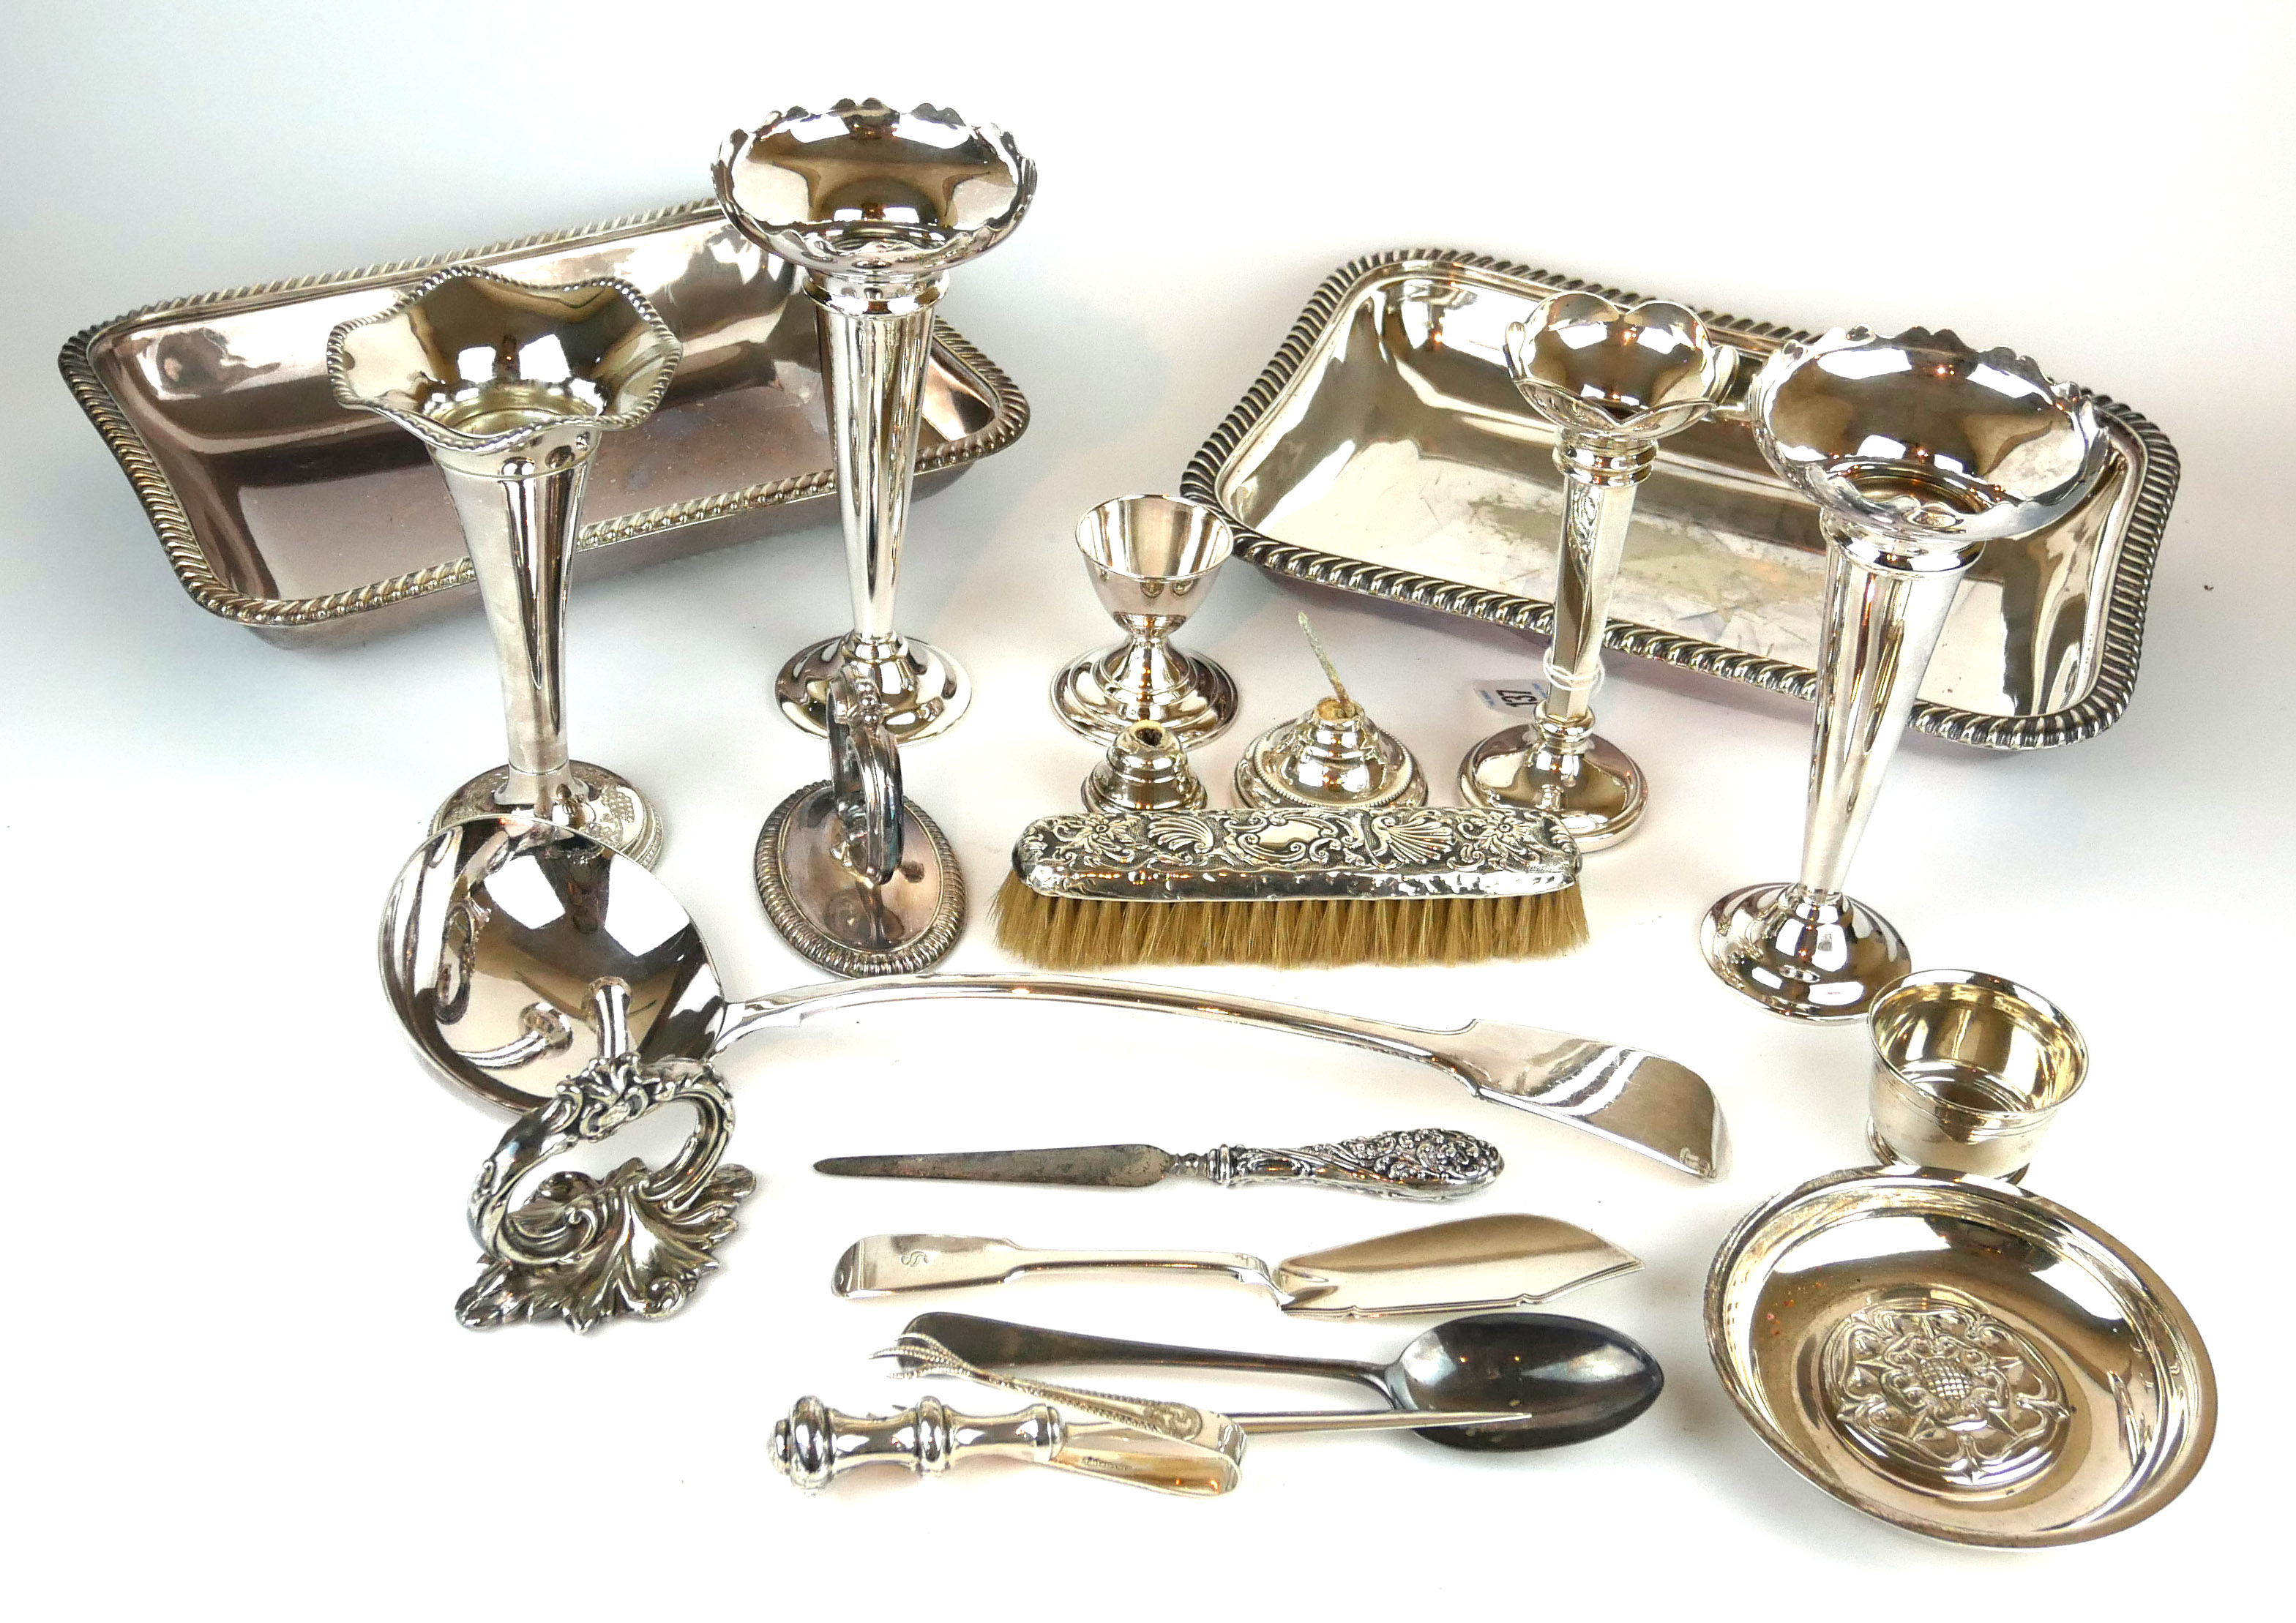 A COLLECTION OF 20TH CENTURY SILVER TRINKETS Comprising an ashtray with Tudor rose design, a trumpet